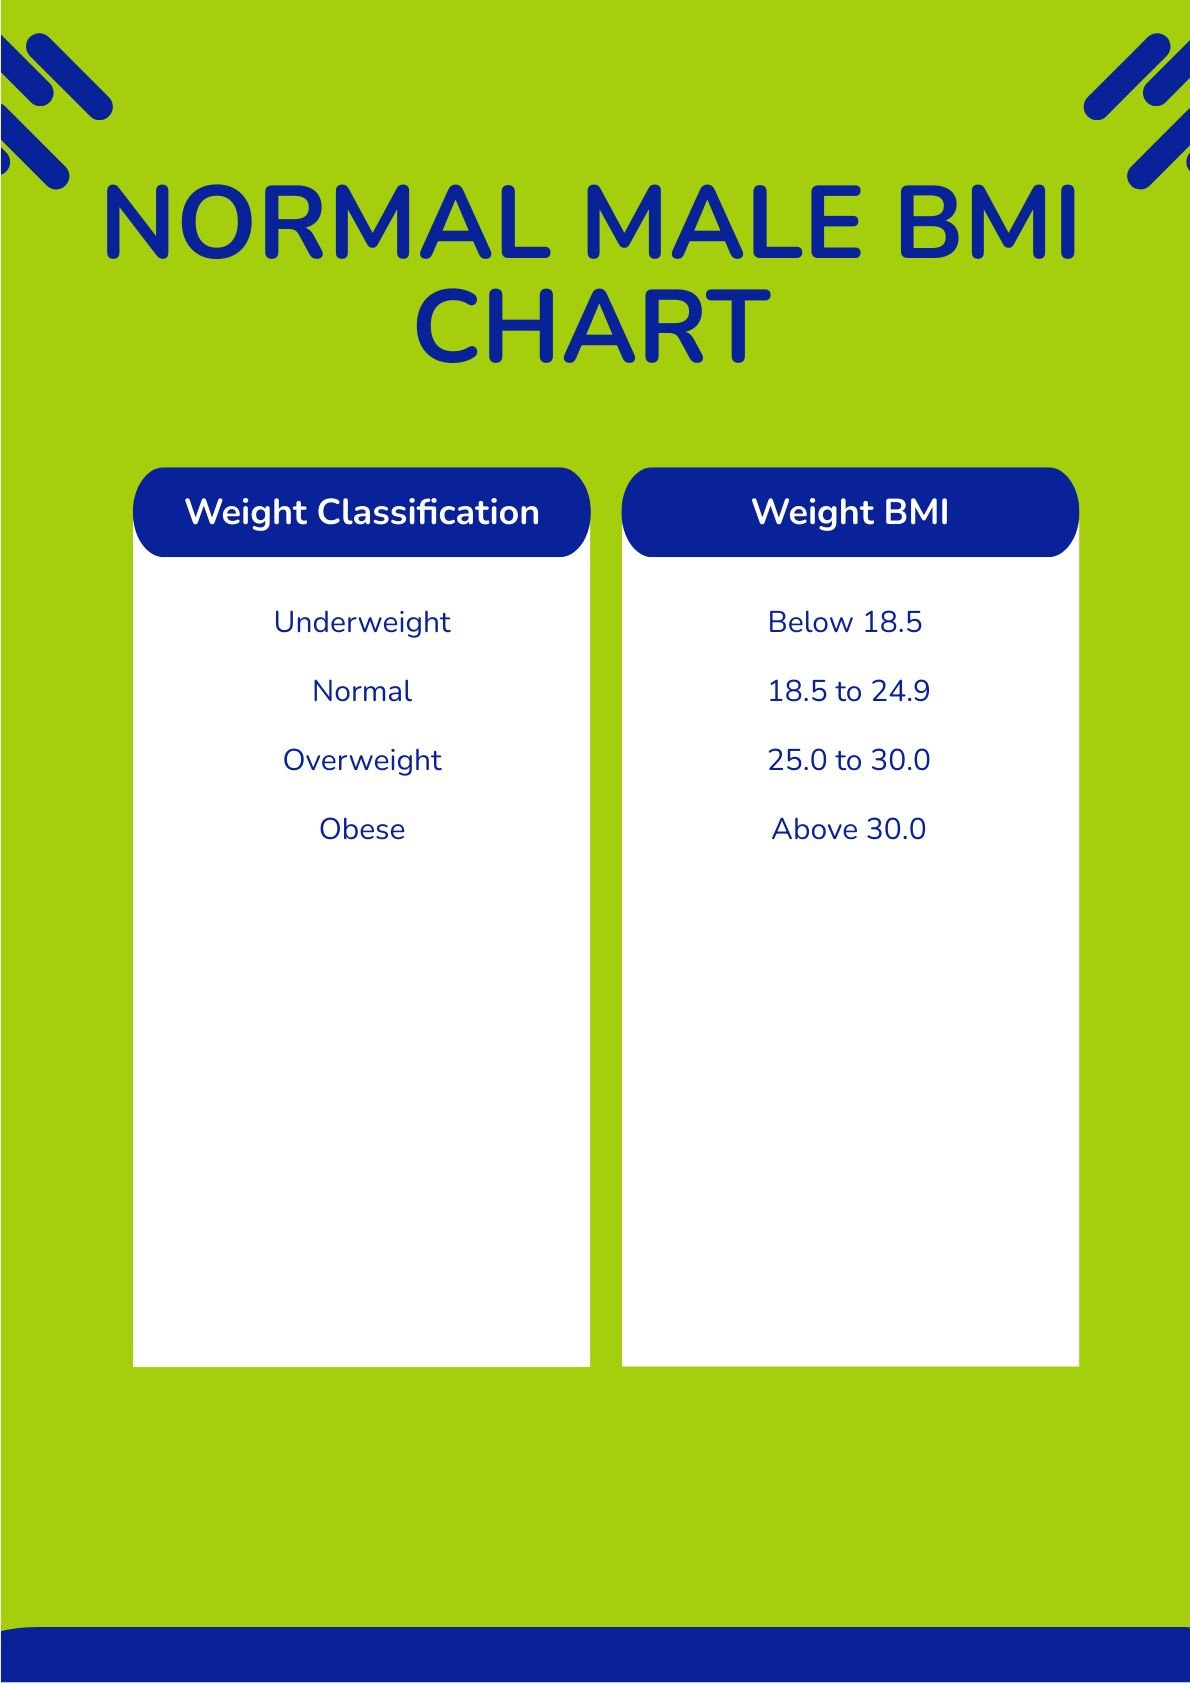 Normal Male BMI Chart